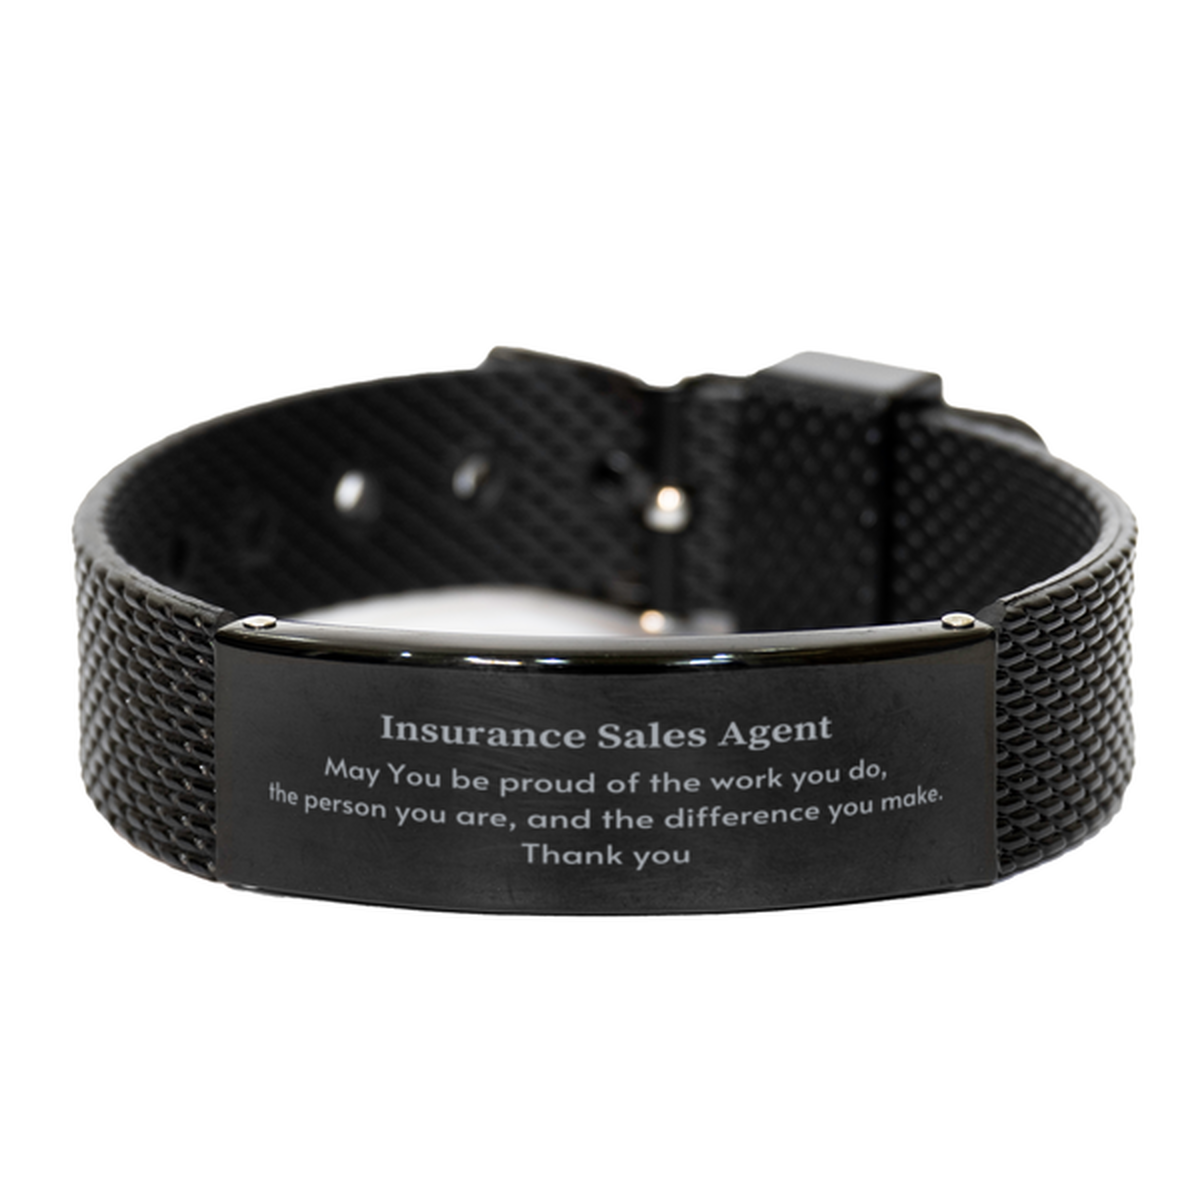 Heartwarming Black Shark Mesh Bracelet Retirement Coworkers Gifts for Insurance Sales Agent, Insurance Sales Agent May You be proud of the work you do, the person you are Gifts for Boss Men Women Friends